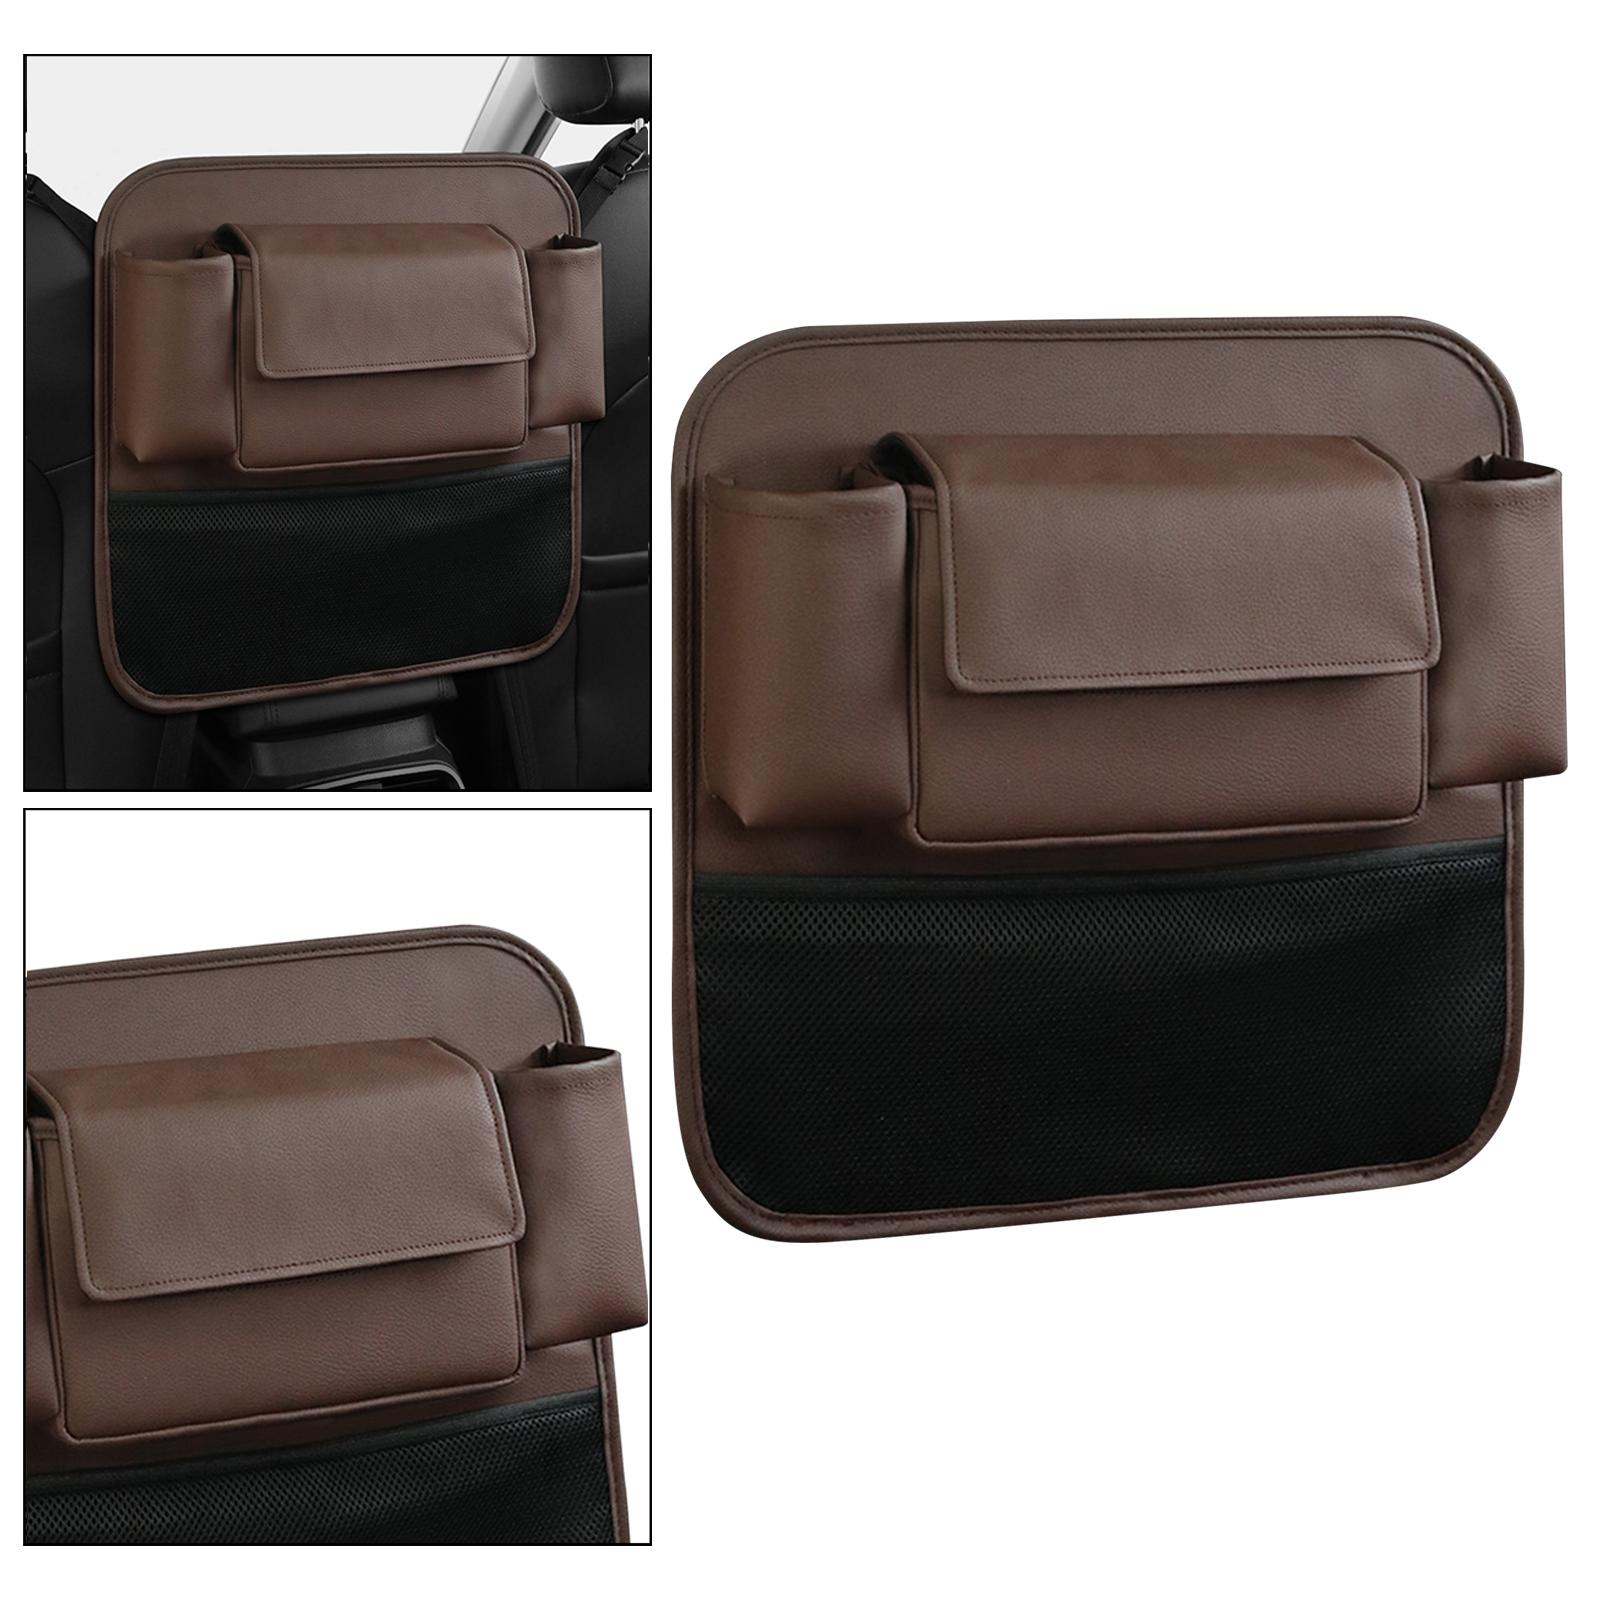 Car Organizer Between Front Seats PU Leather for Document Snacks Phones Brown